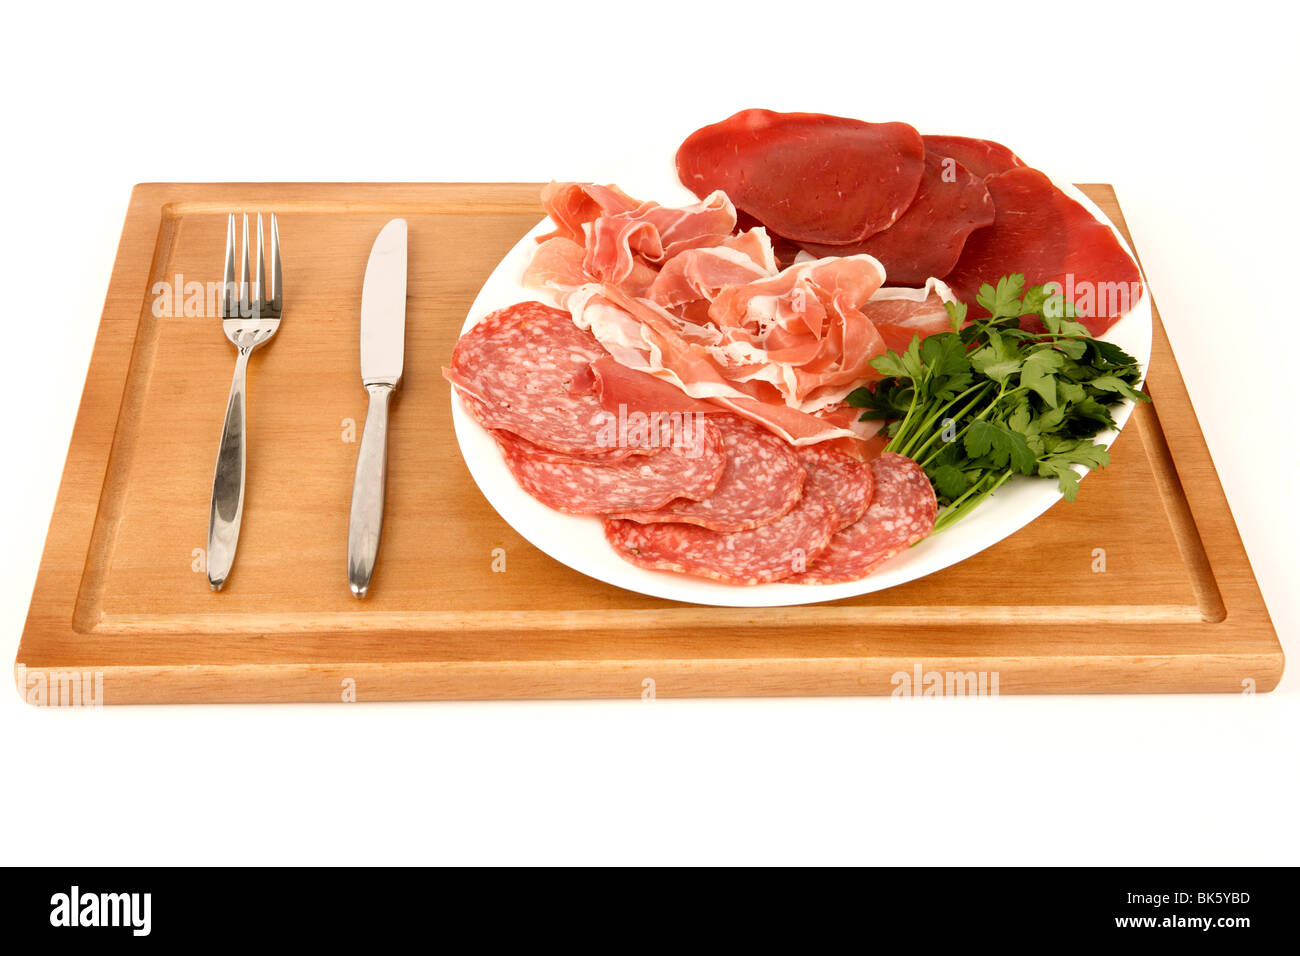 A plate of Italian meats with Salami and bresaola on a wooden chopping board Stock Photo